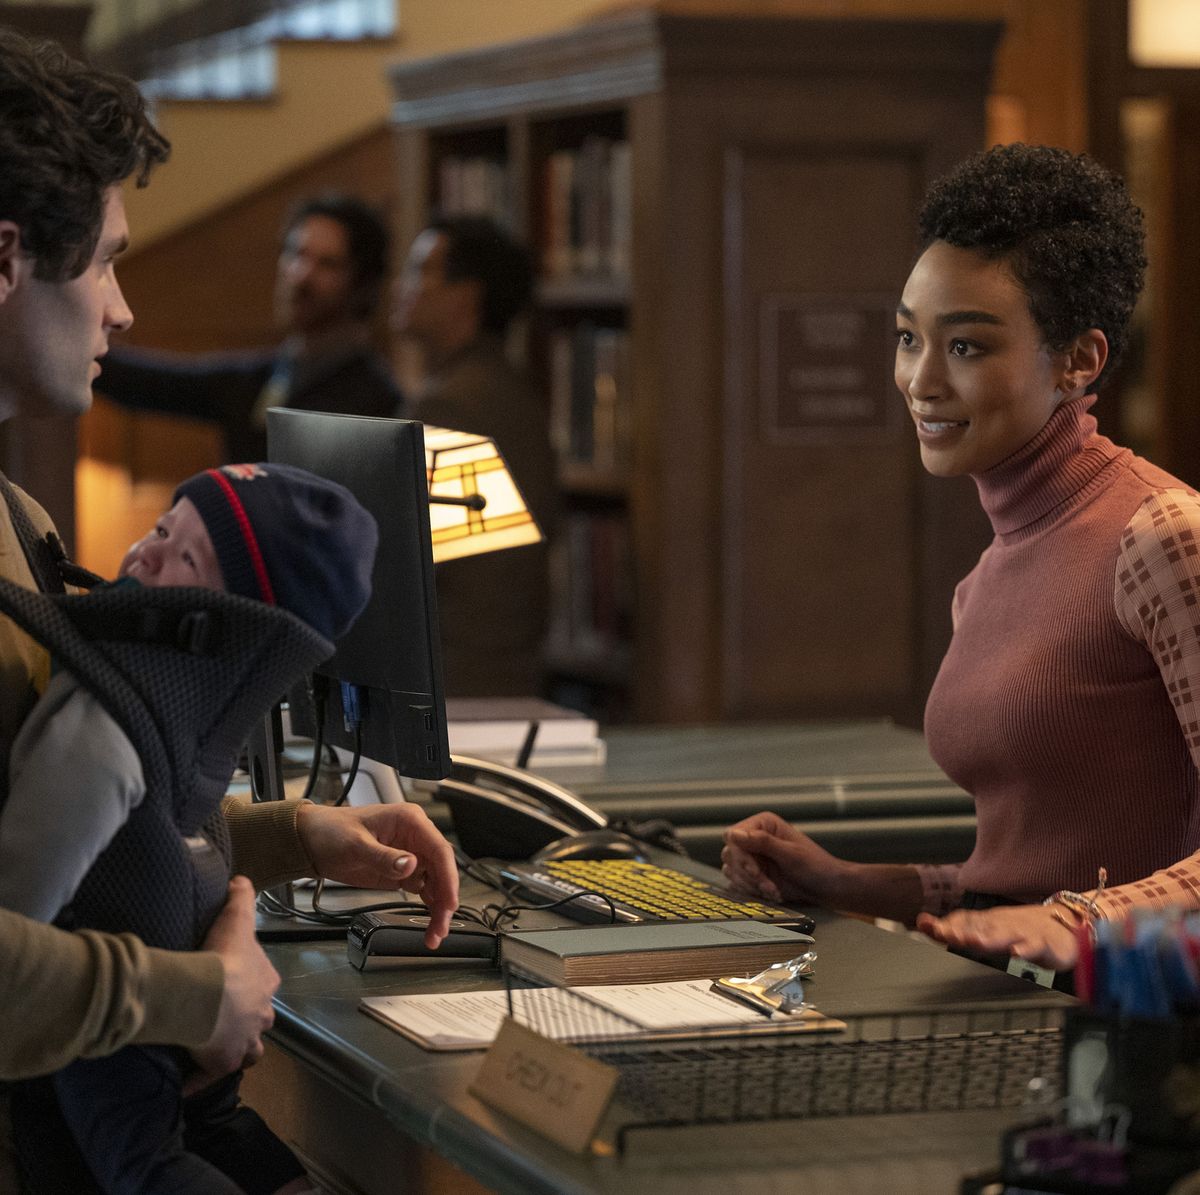 Tati Gabrielle Weighs In on How Netflix's 'You' Should End for Joe